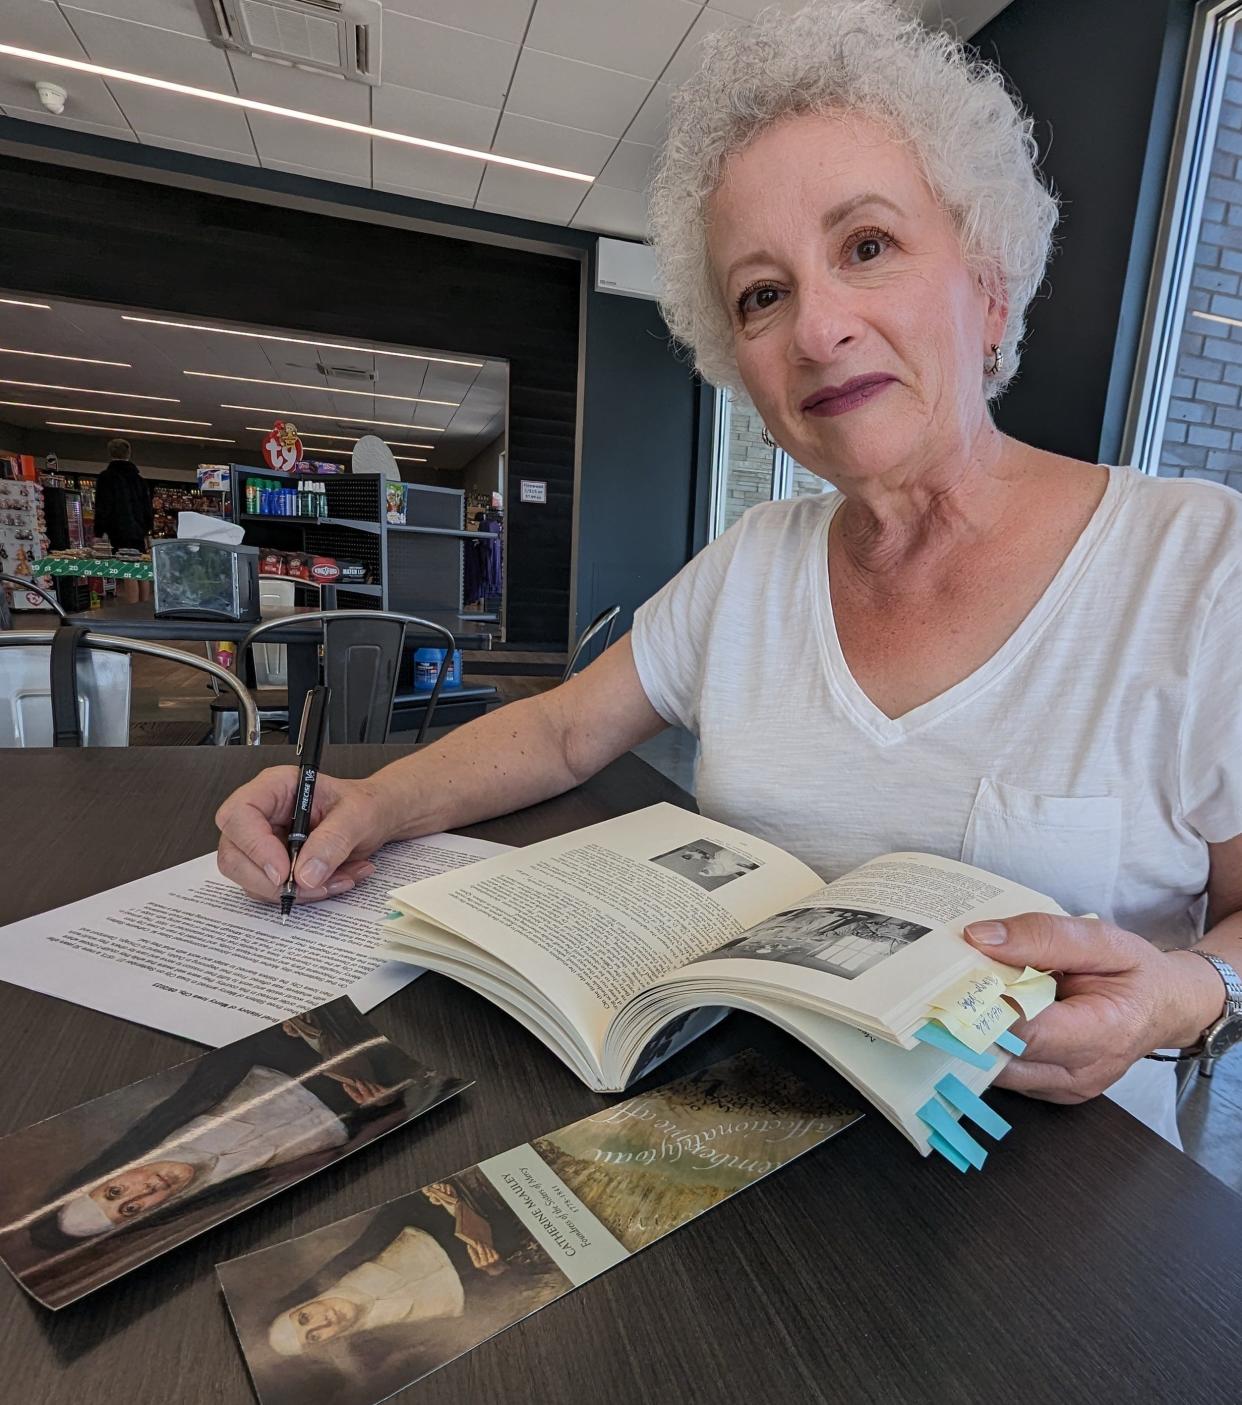 One of the local authorities on Mercy Hospital Iowa City history is Margaret Reese, a now-retired former community relations employee who still assists with public relations for the hospital as a volunteer.